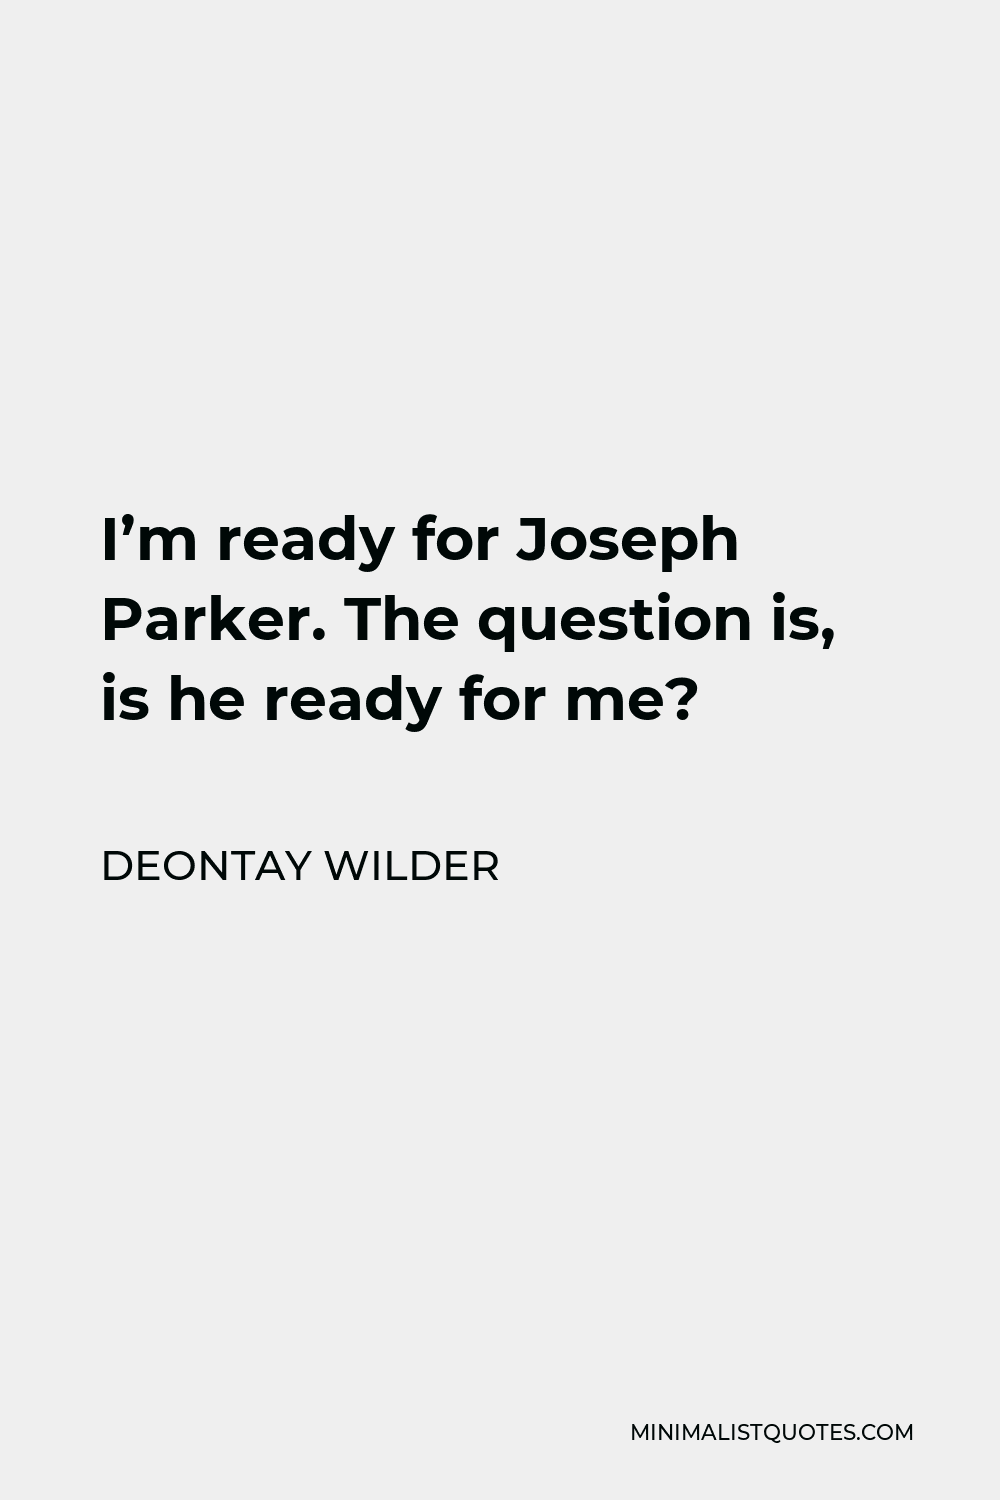 Deontay Wilder Quote - I’m ready for Joseph Parker. The question is, is he ready for me?